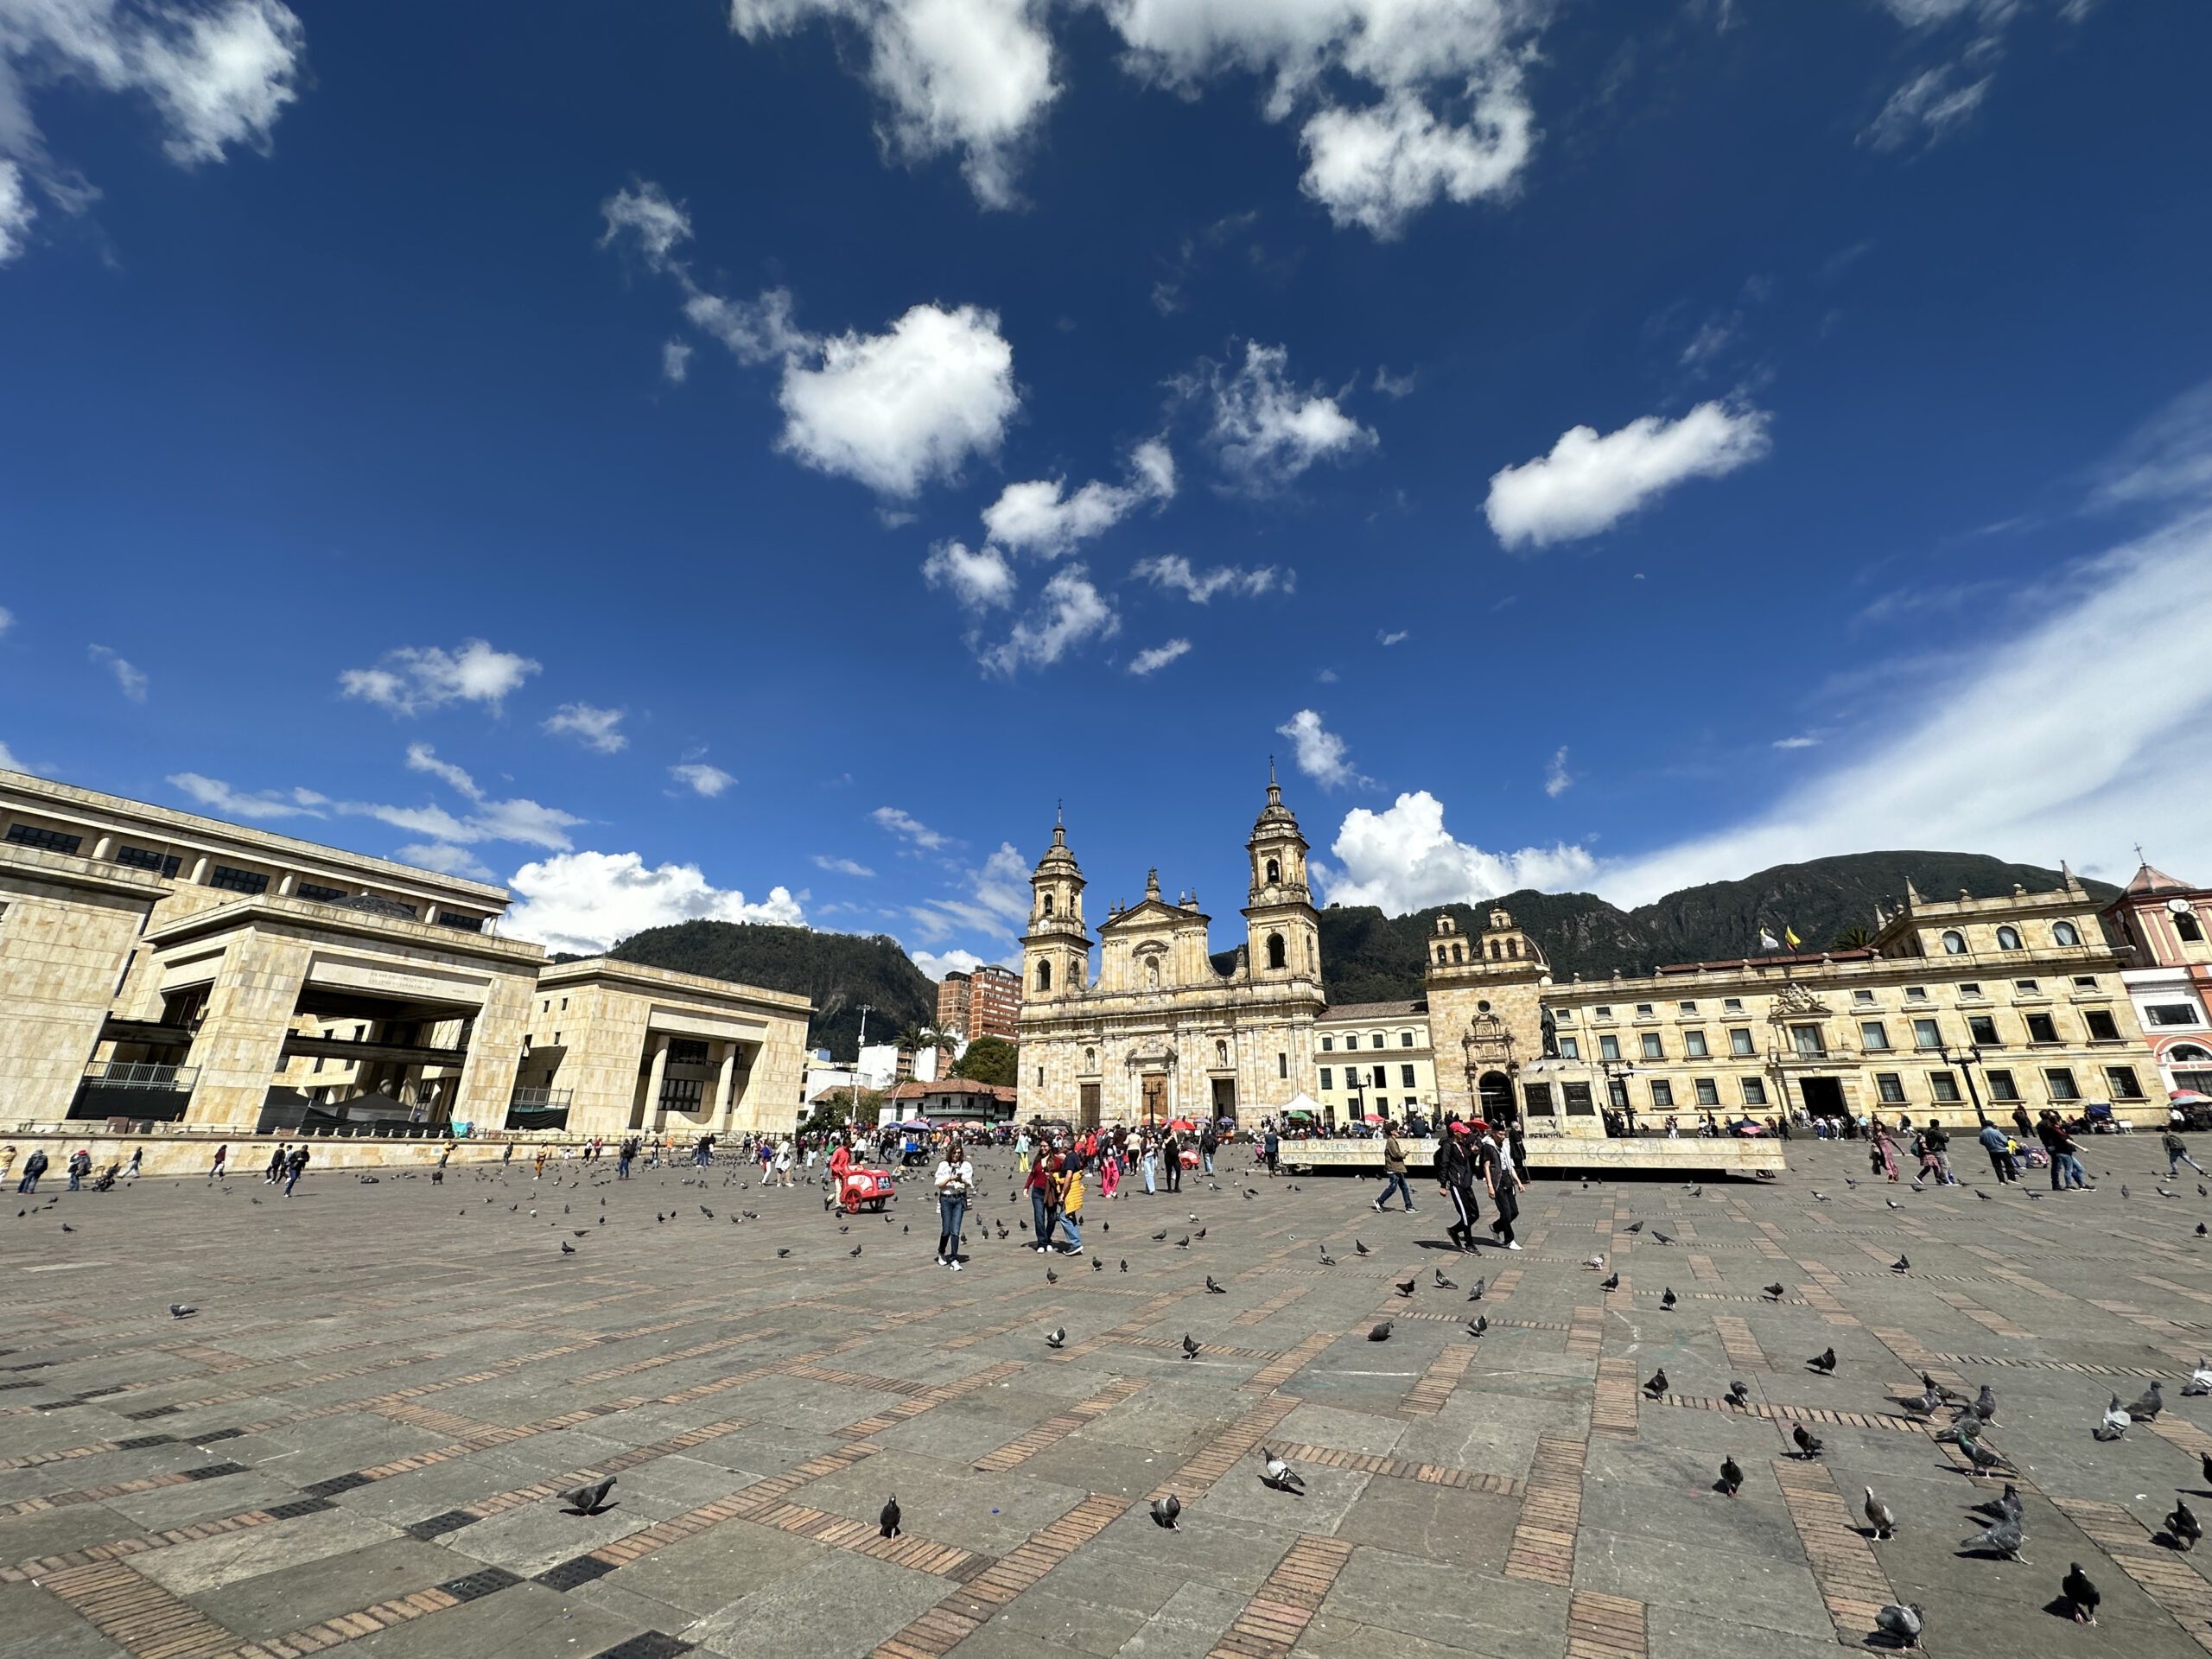 A wide view of a large cobblestone plaza with scattered people and pigeons, surrounded by historic buildings and a mountainous backdrop under a partly cloudy sky, creates the perfect setting for Bogota city tours.